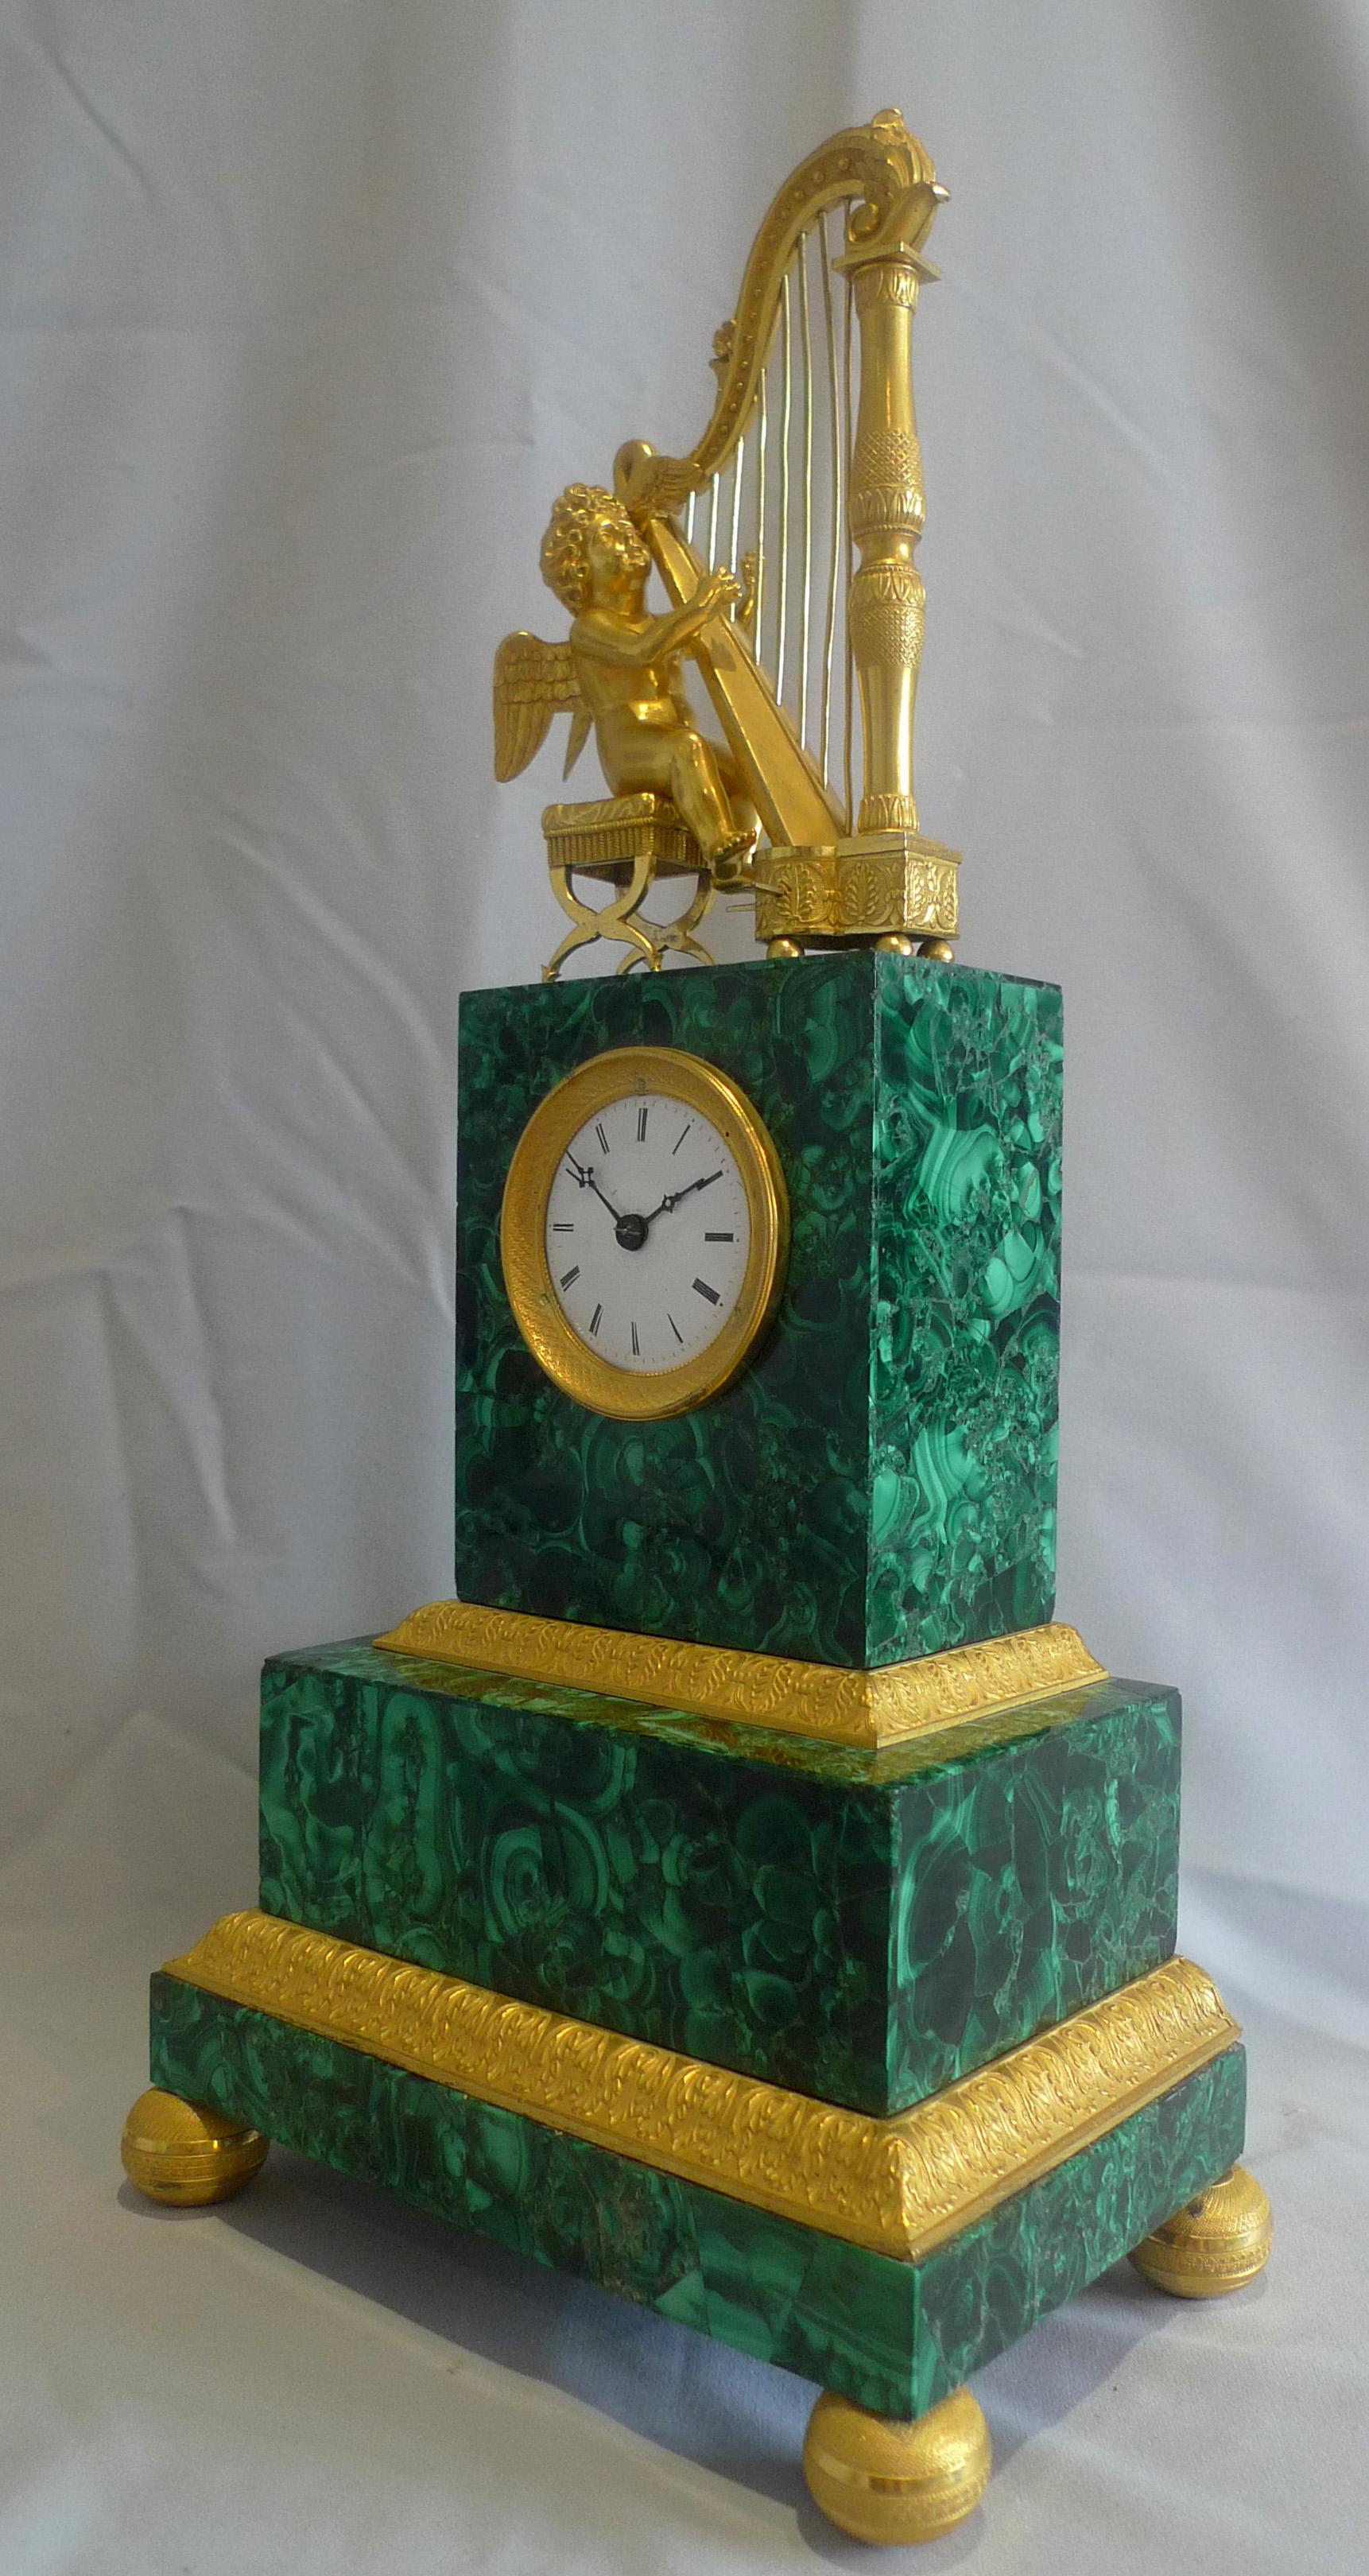 A stunning Russian malachite and ormolu mantel clock. The case possibly Russian but probably Paris, Palais Royal ( from the quality and style of the original ormolu mounts). The superb malachite veneered on to the bronze case. The malachite on all